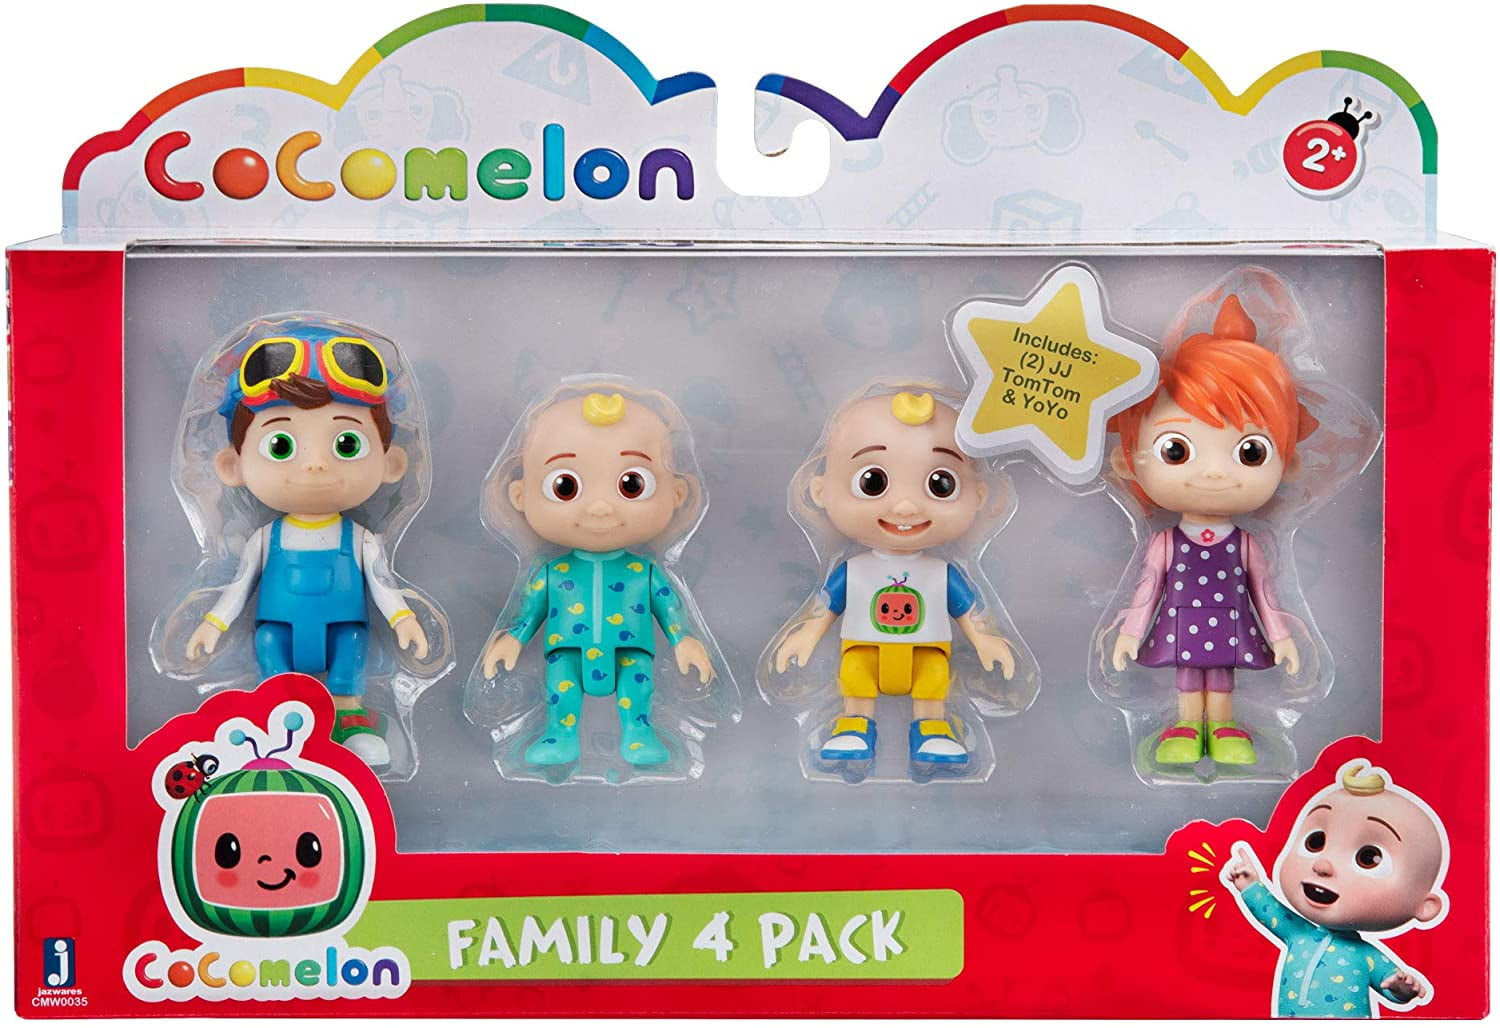 Cocomelon Action Figure Toys JJ Family Model Dolls with Box For Children Gift 